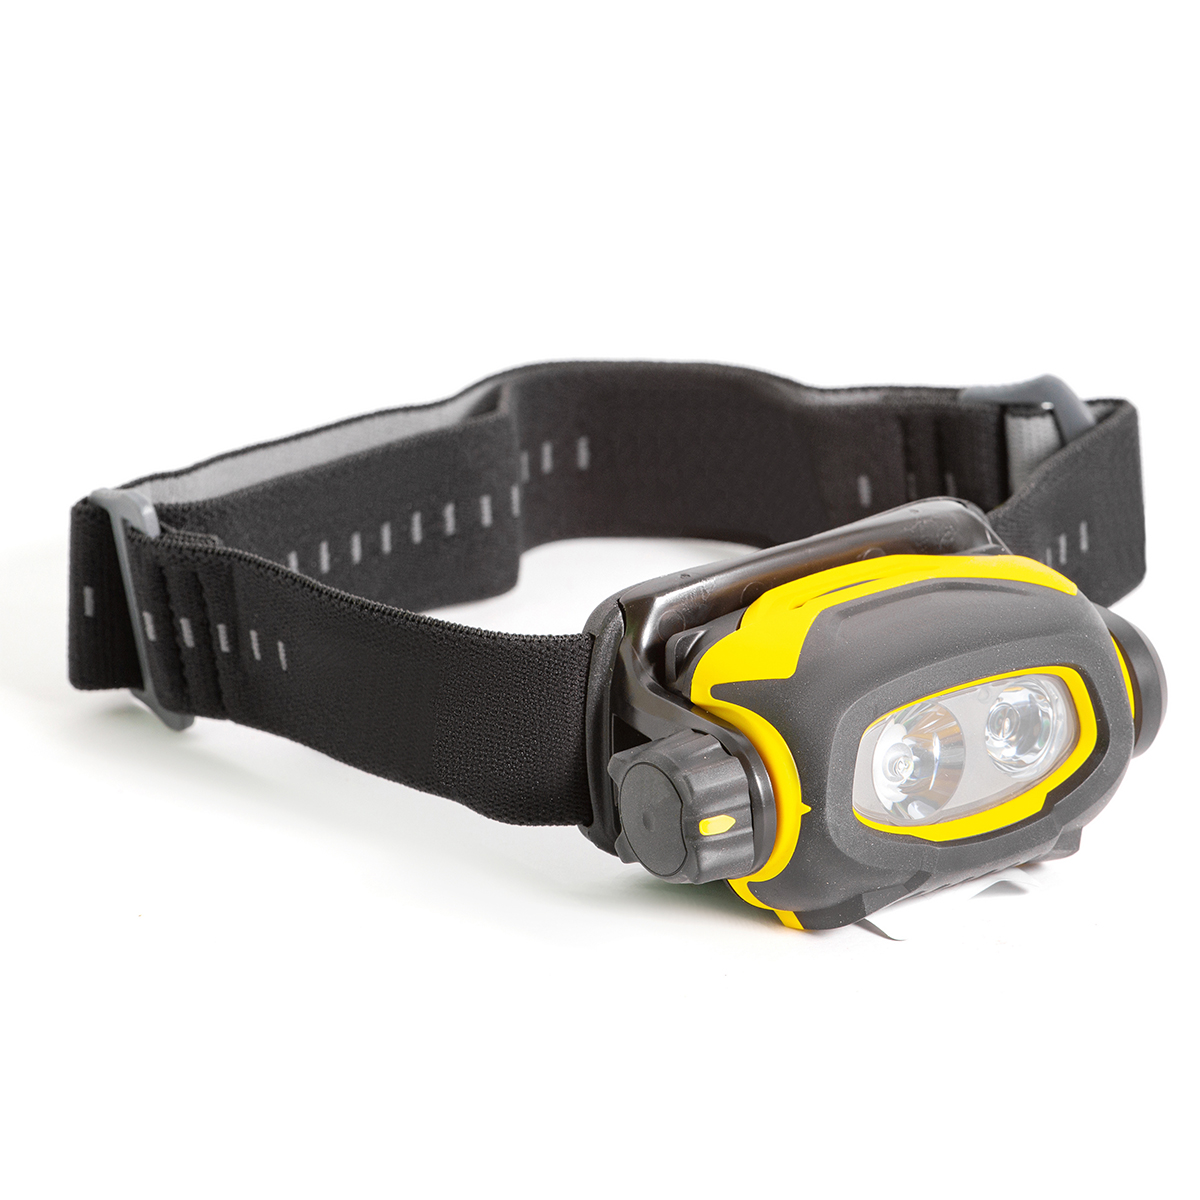 christmas-gift-ideas-for-car-and-diy-lover/images/LED-Headlamps-partsavatar-canada.jpeg